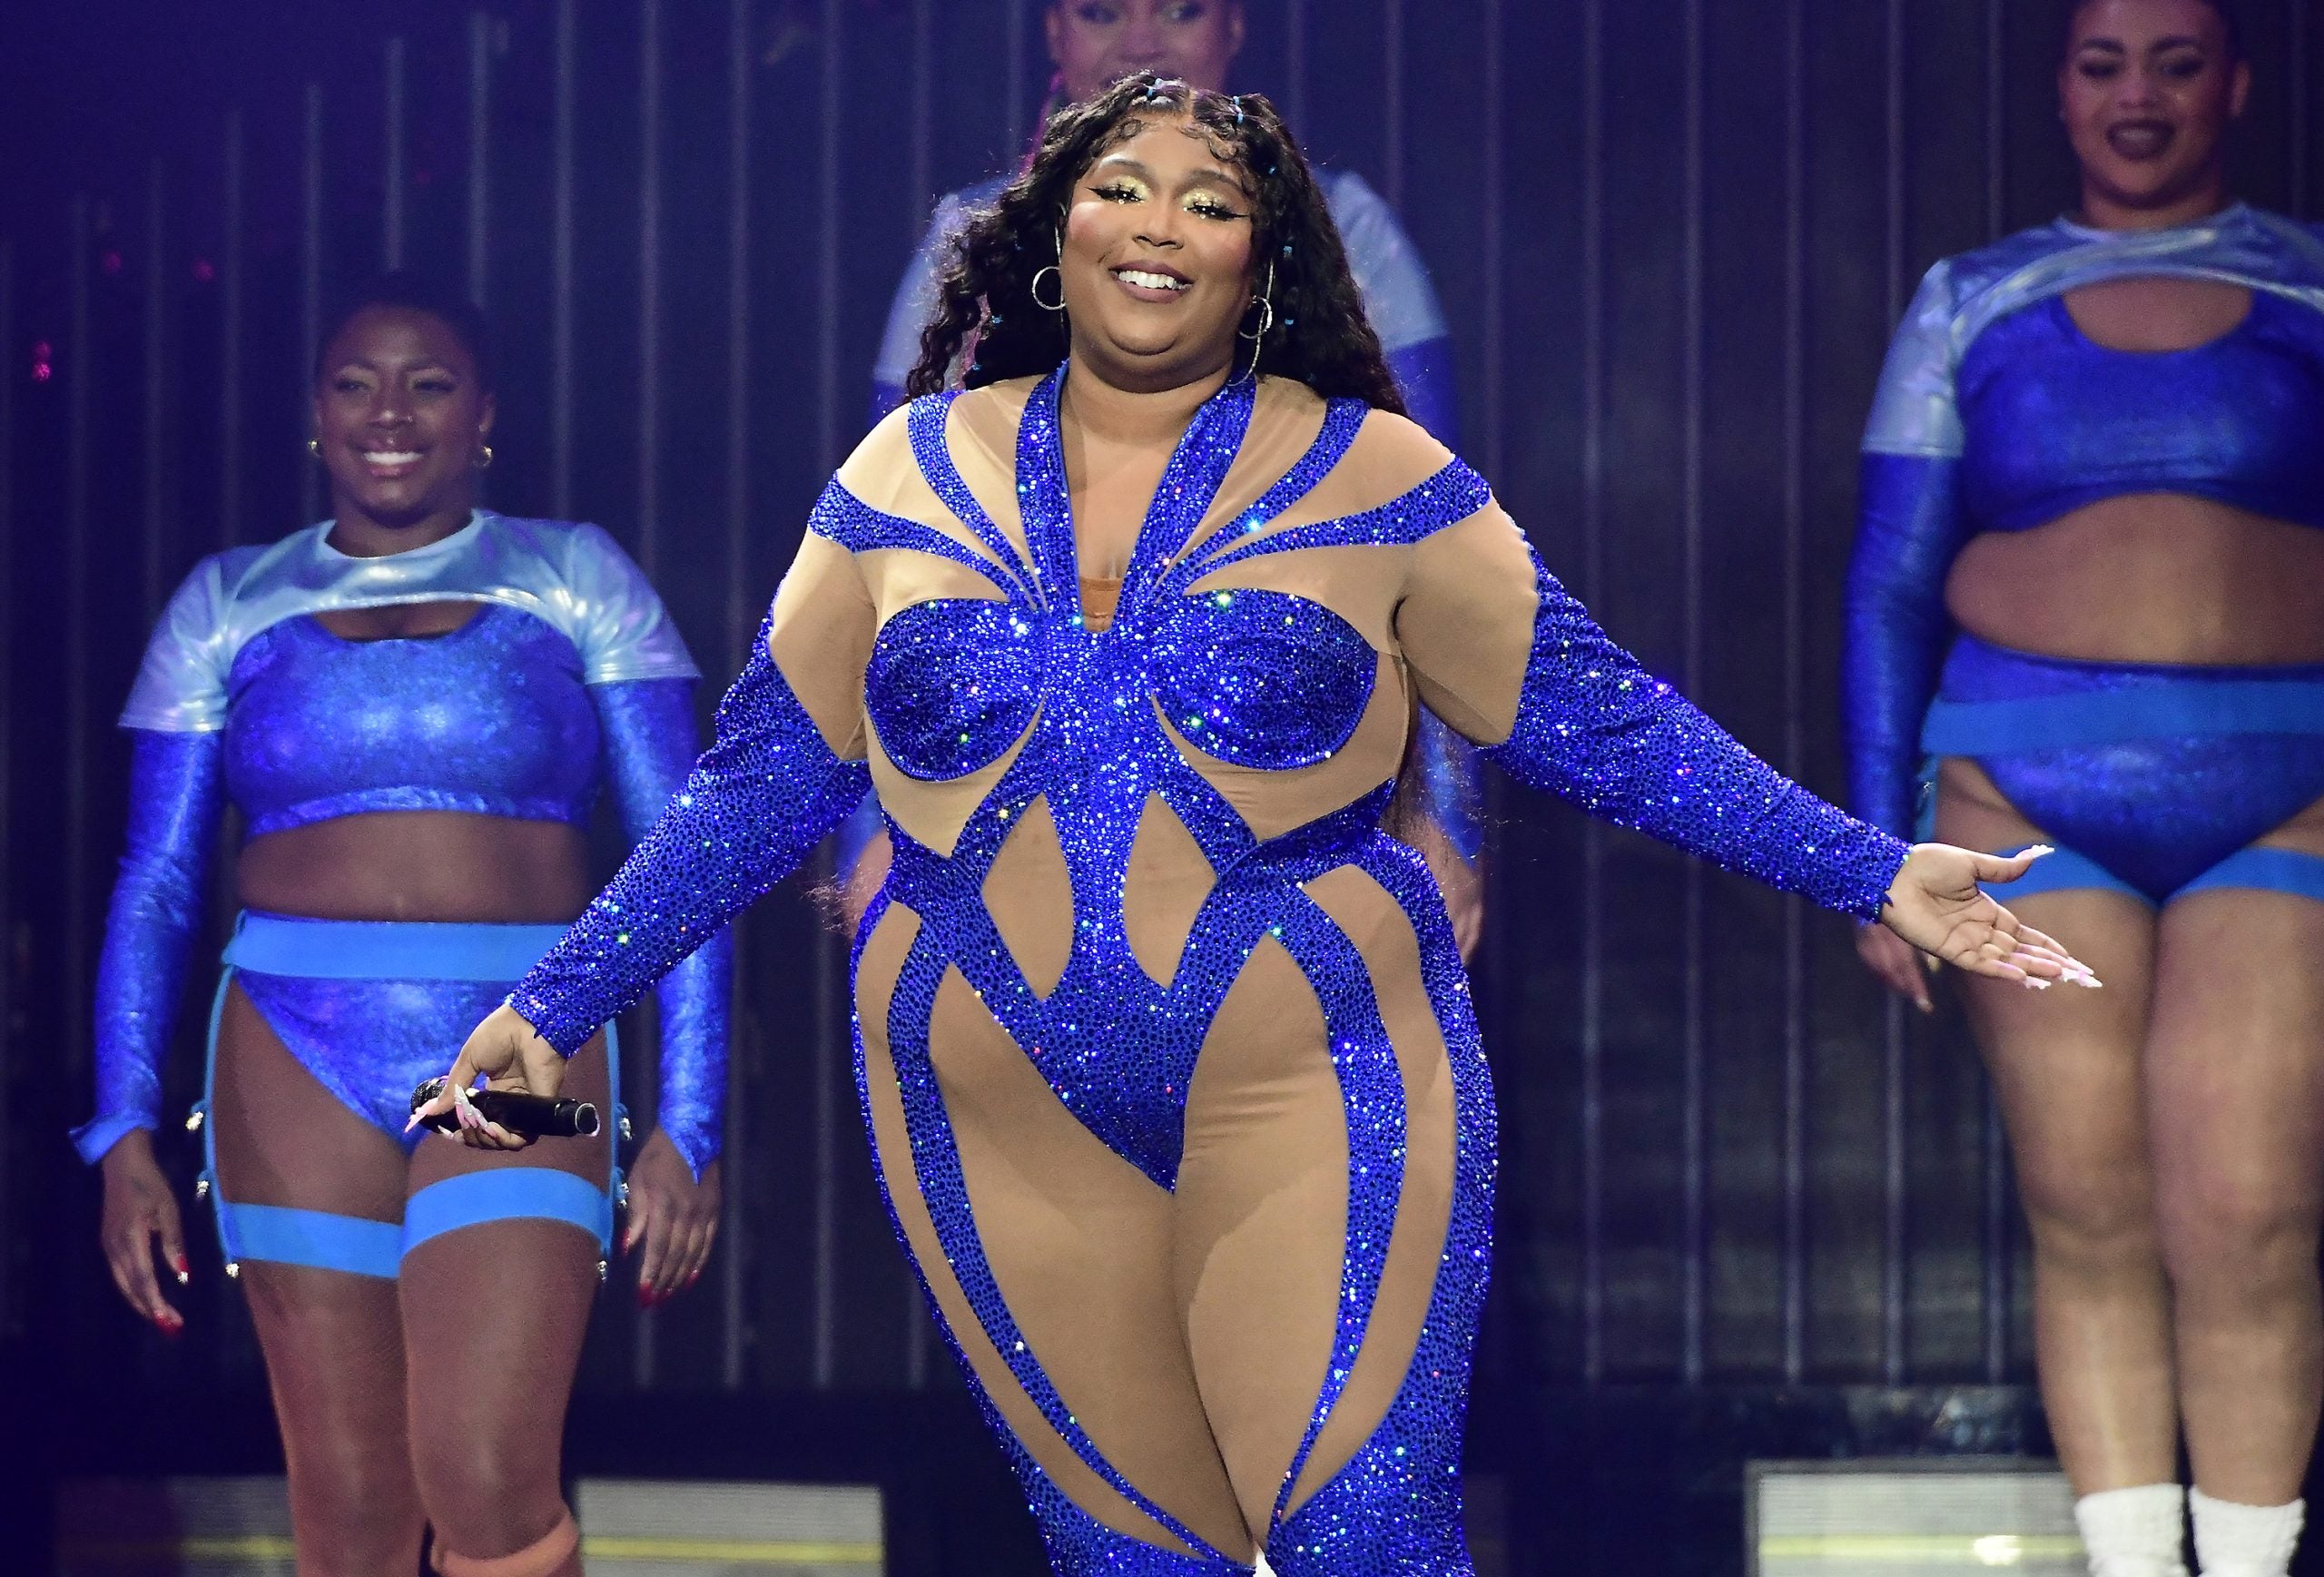 Lizzo Explained The 'Political' Statement Behind Her Iconic Stage